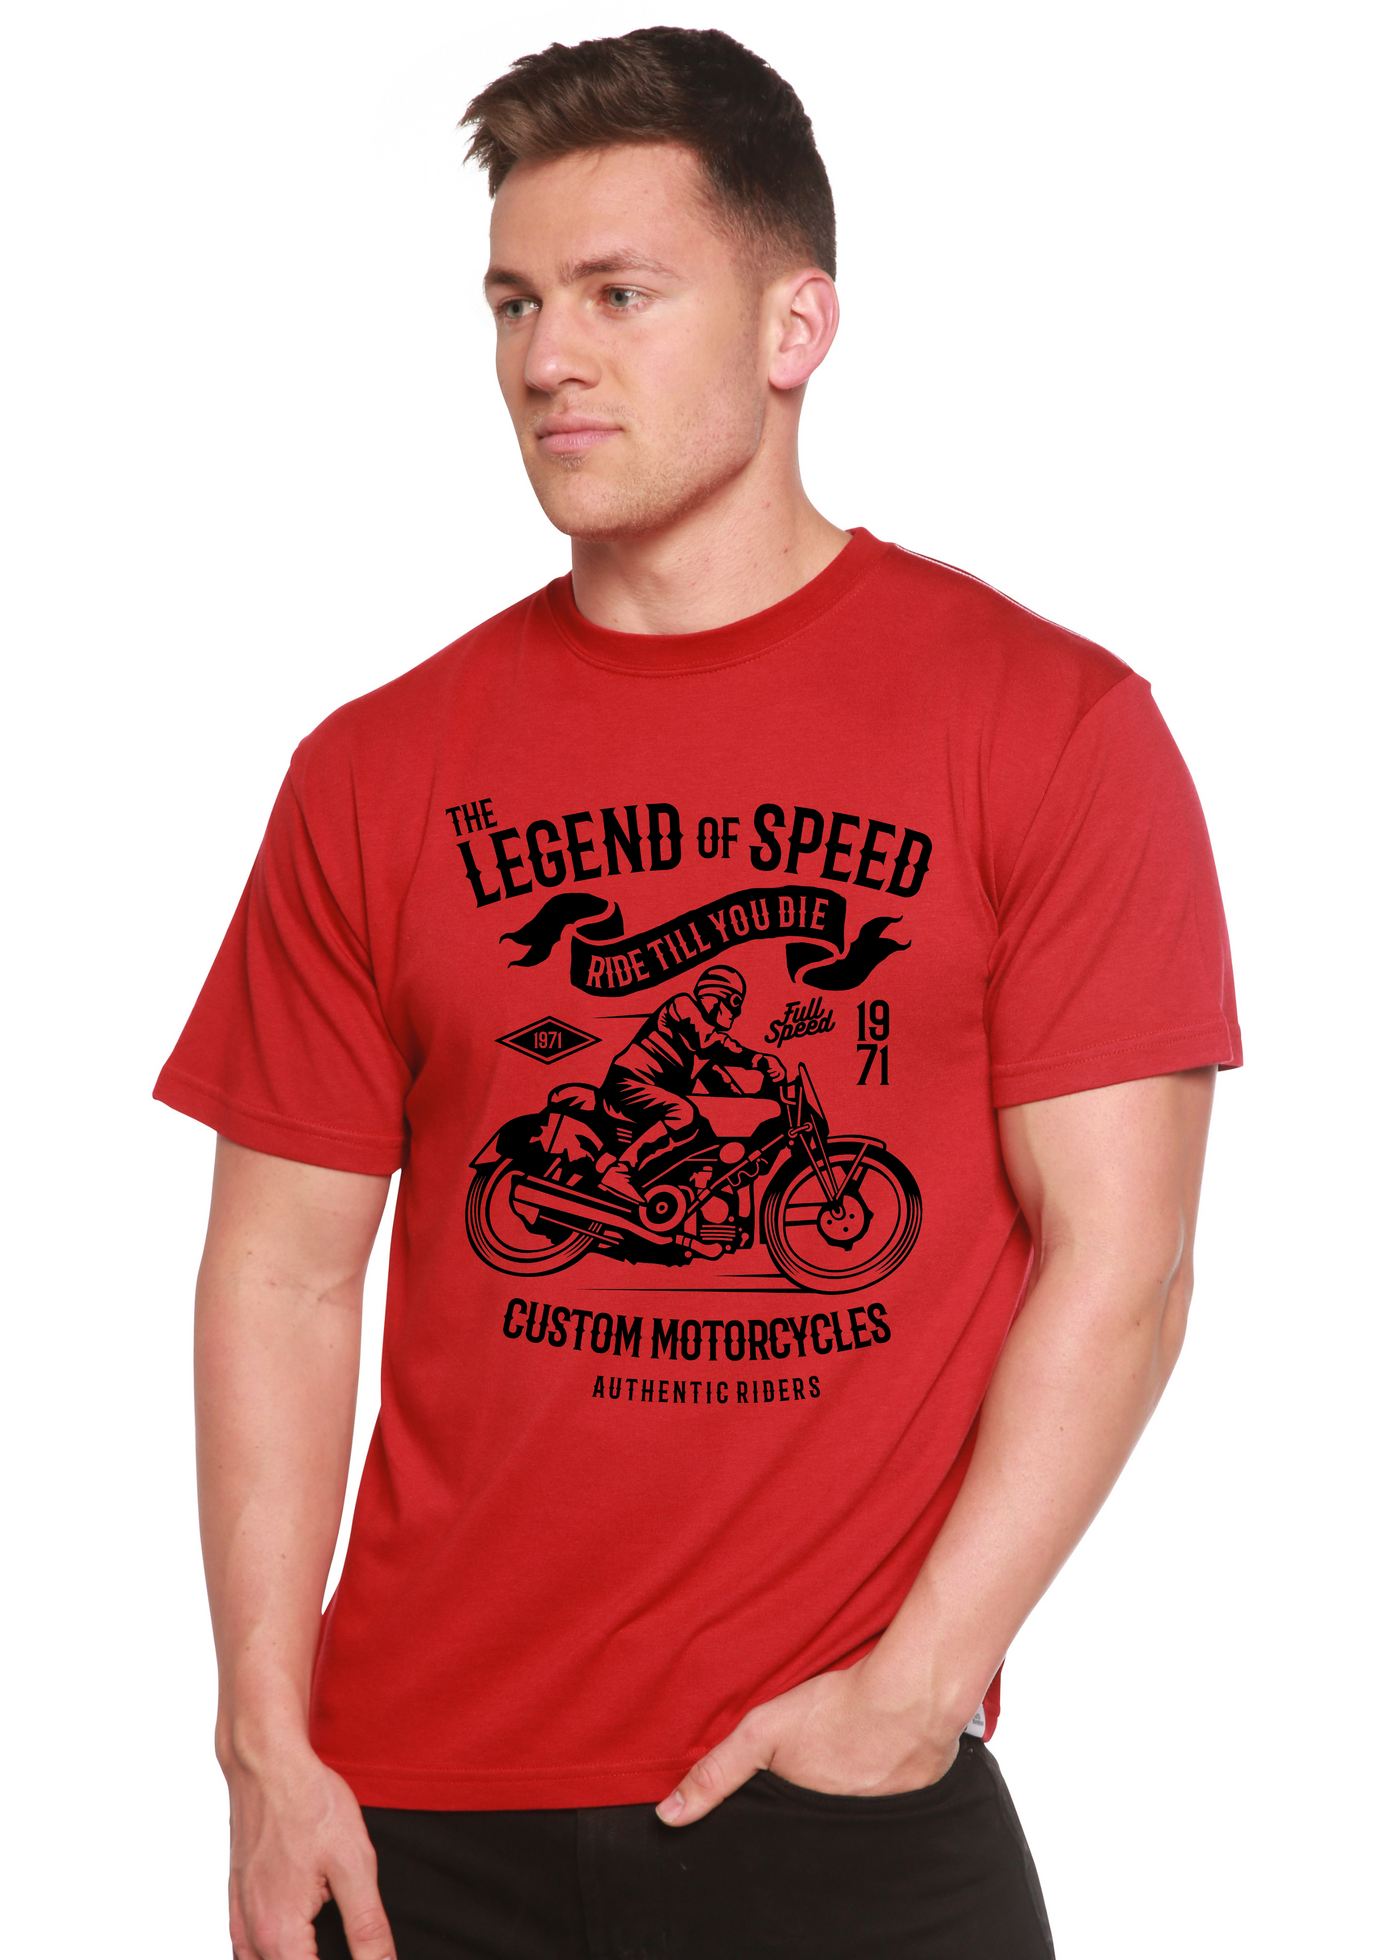 The Legend of Speed men's bamboo tshirt pompeian red